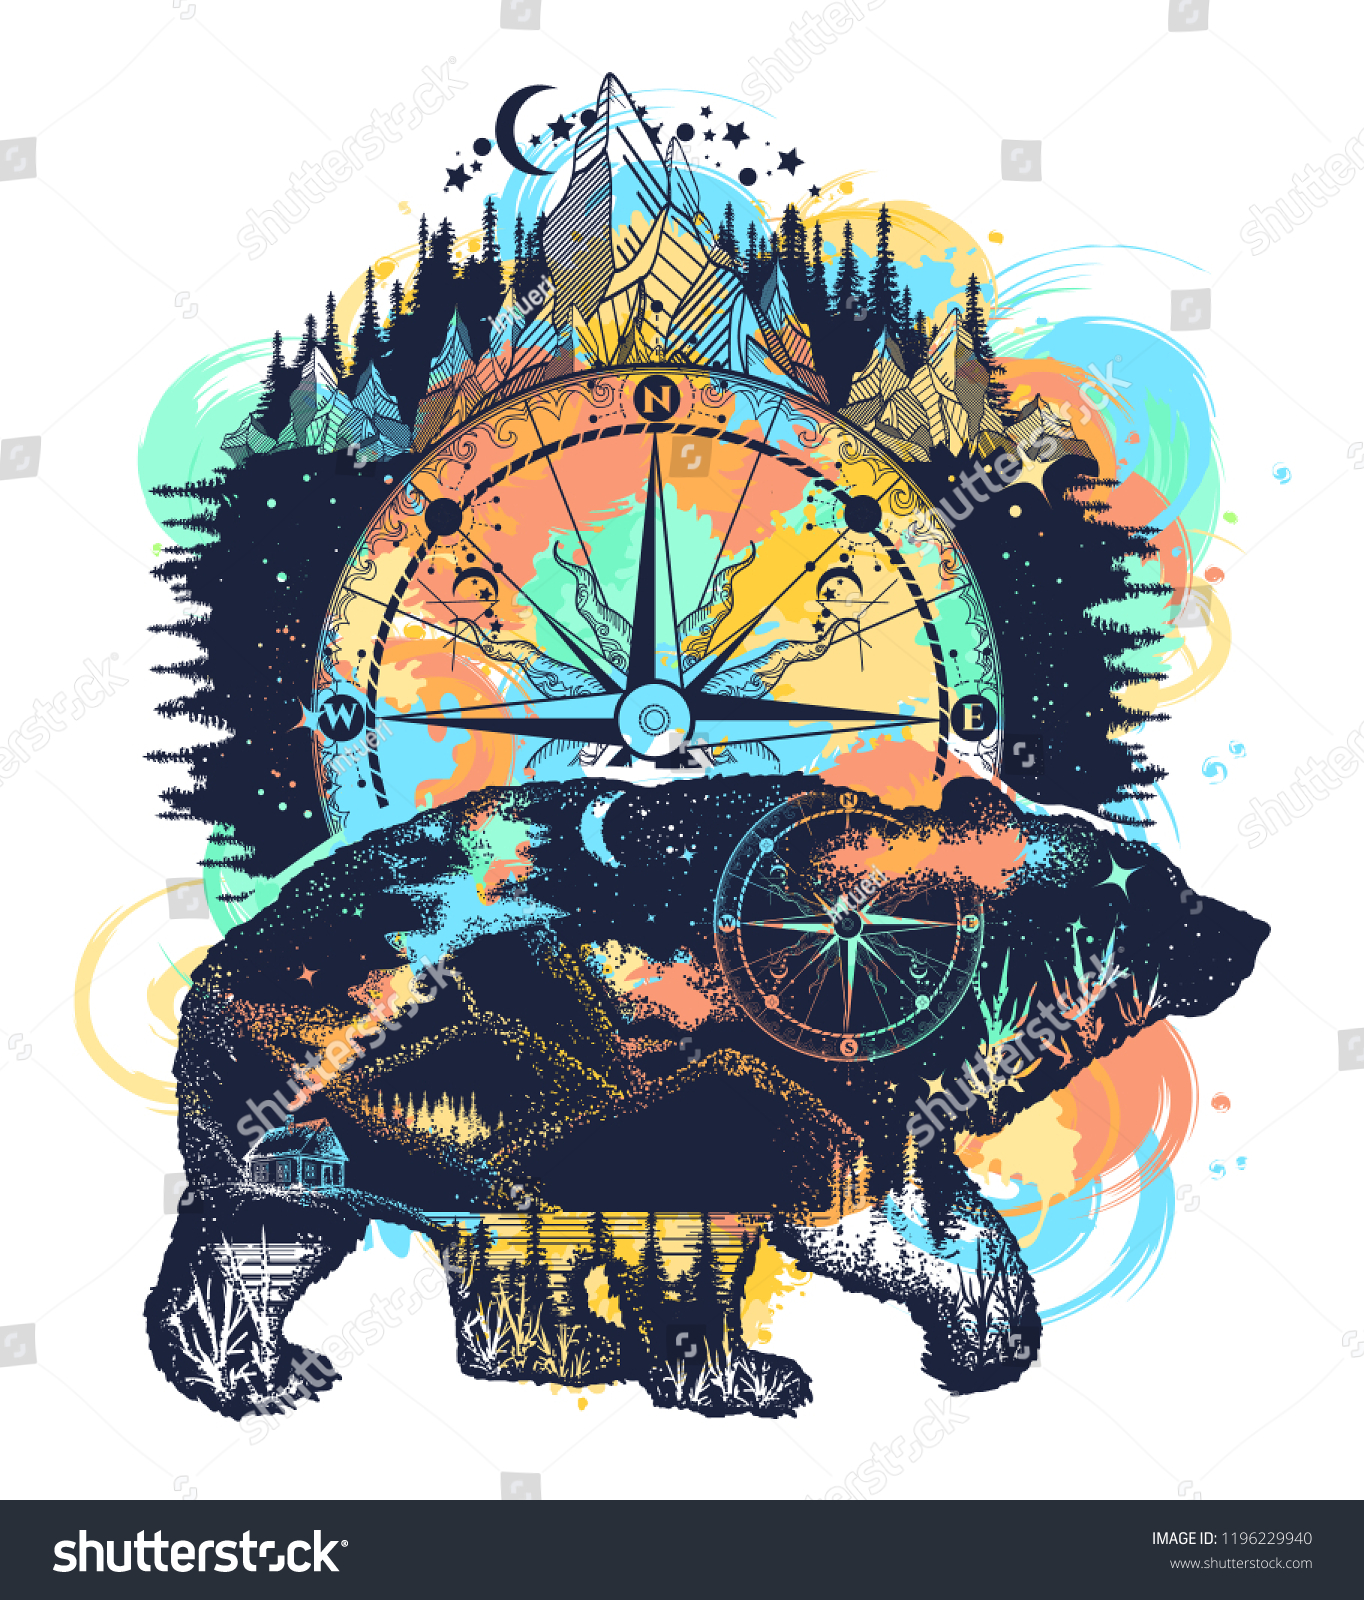 Bear Mountains Tattoo Watercolor Splashes Style Stock Vector